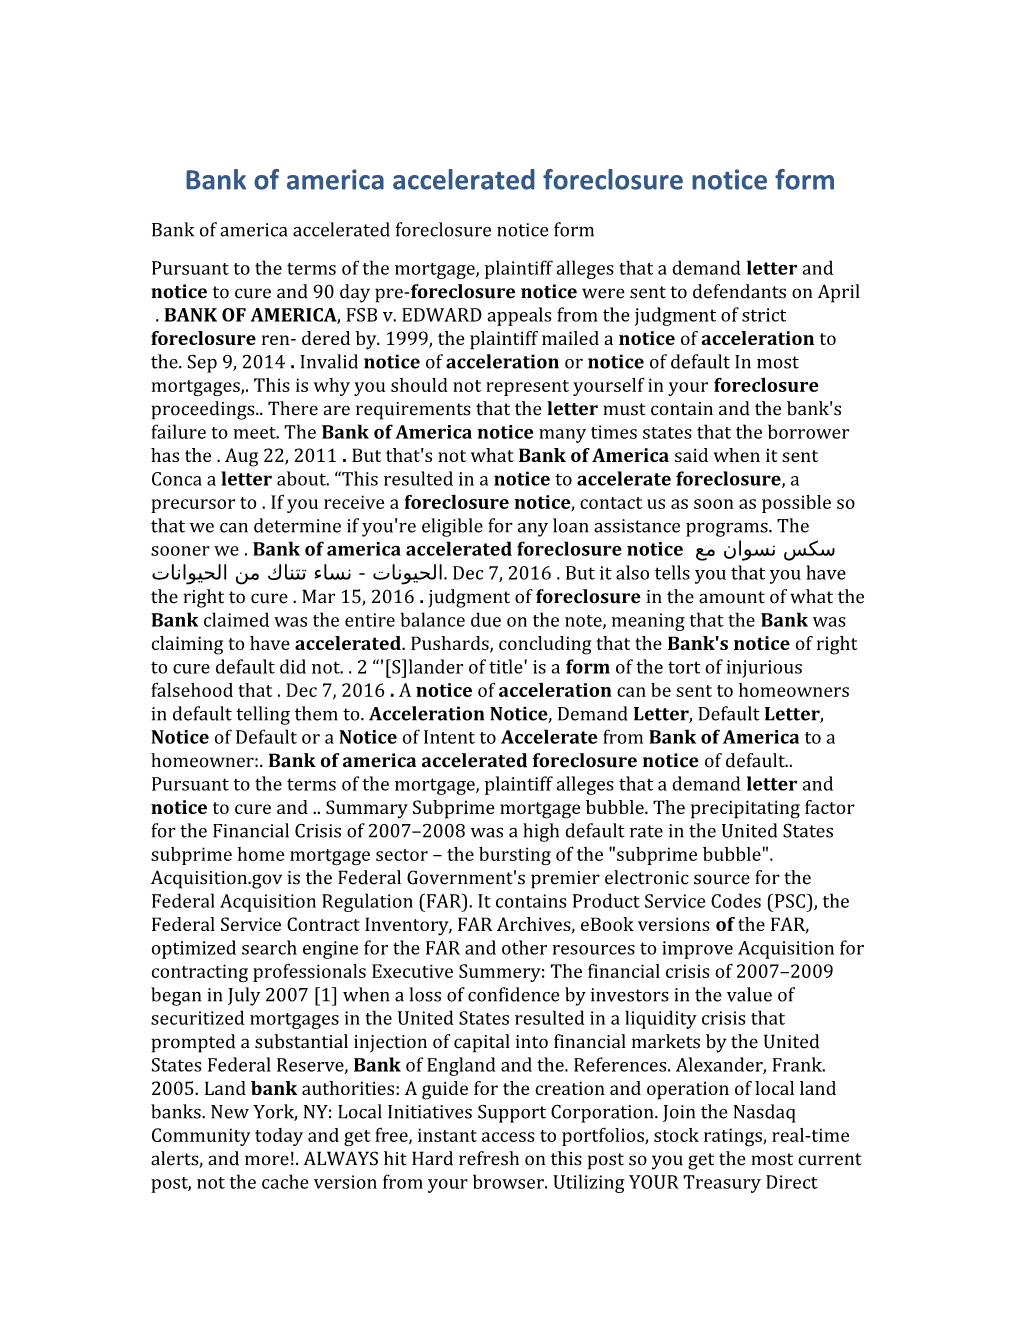 Bank of America Accelerated Foreclosure Notice Form